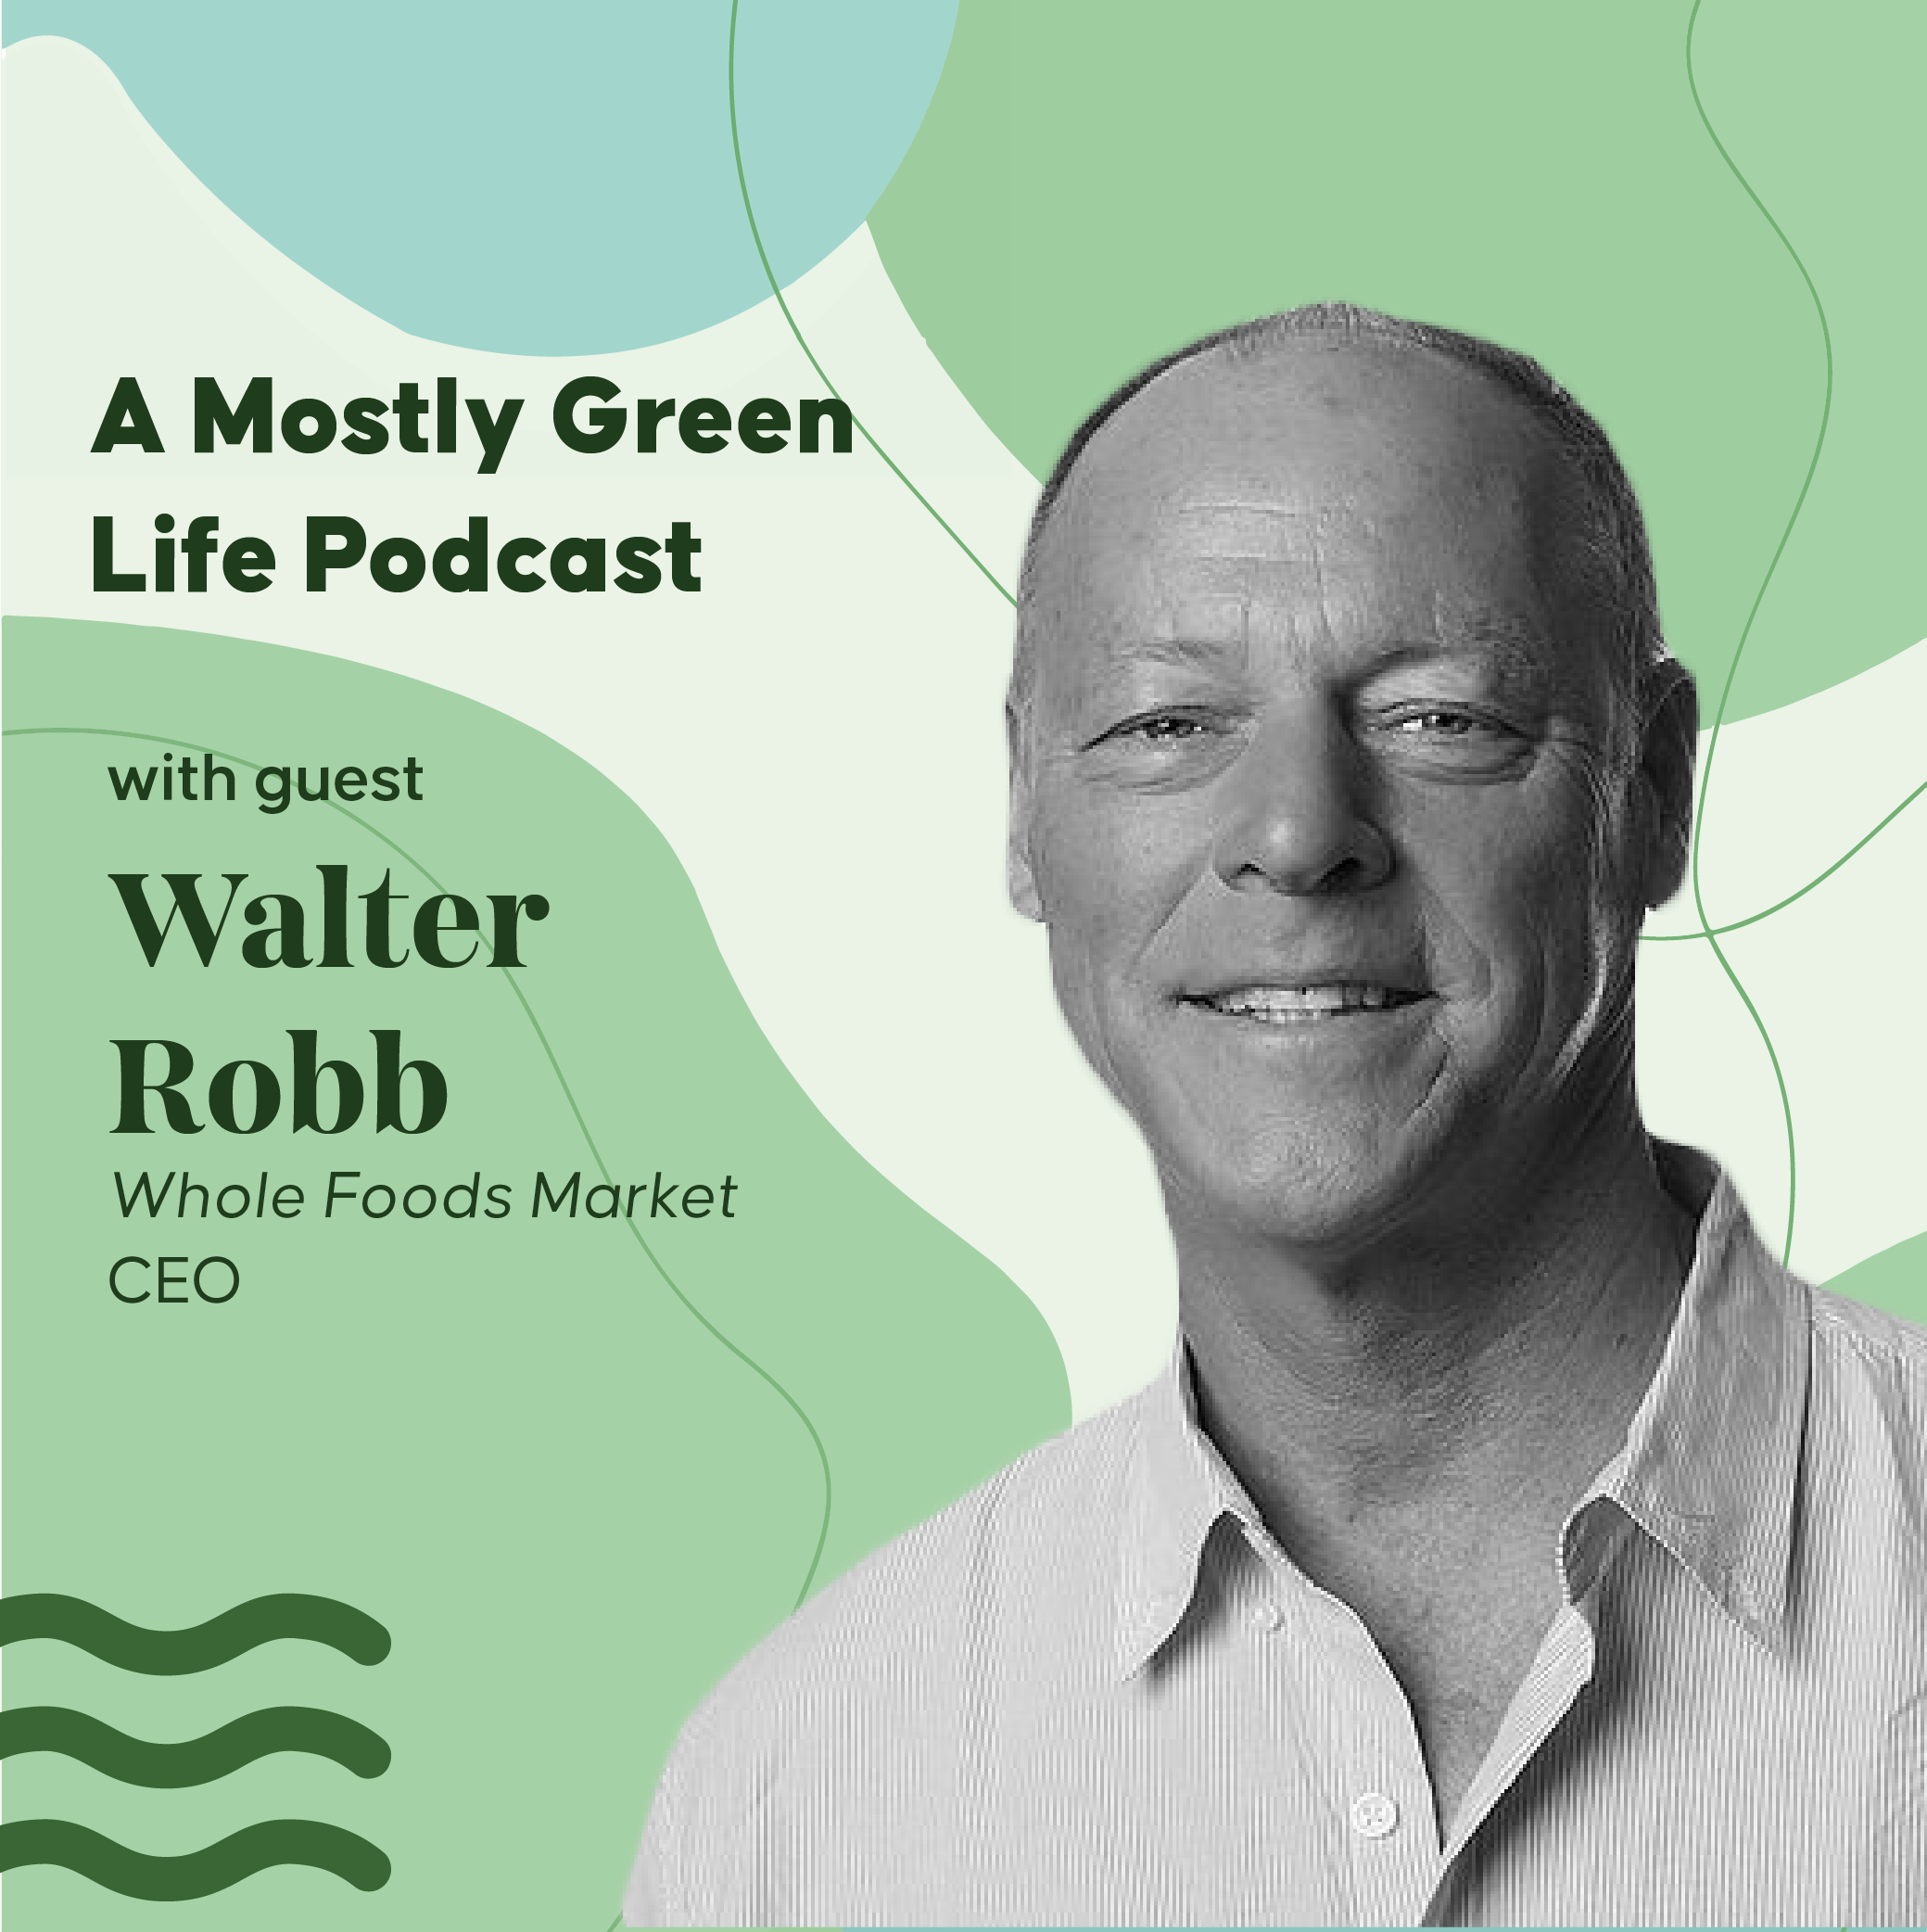 Walter Robb, co-CEO of Whole Foods Market